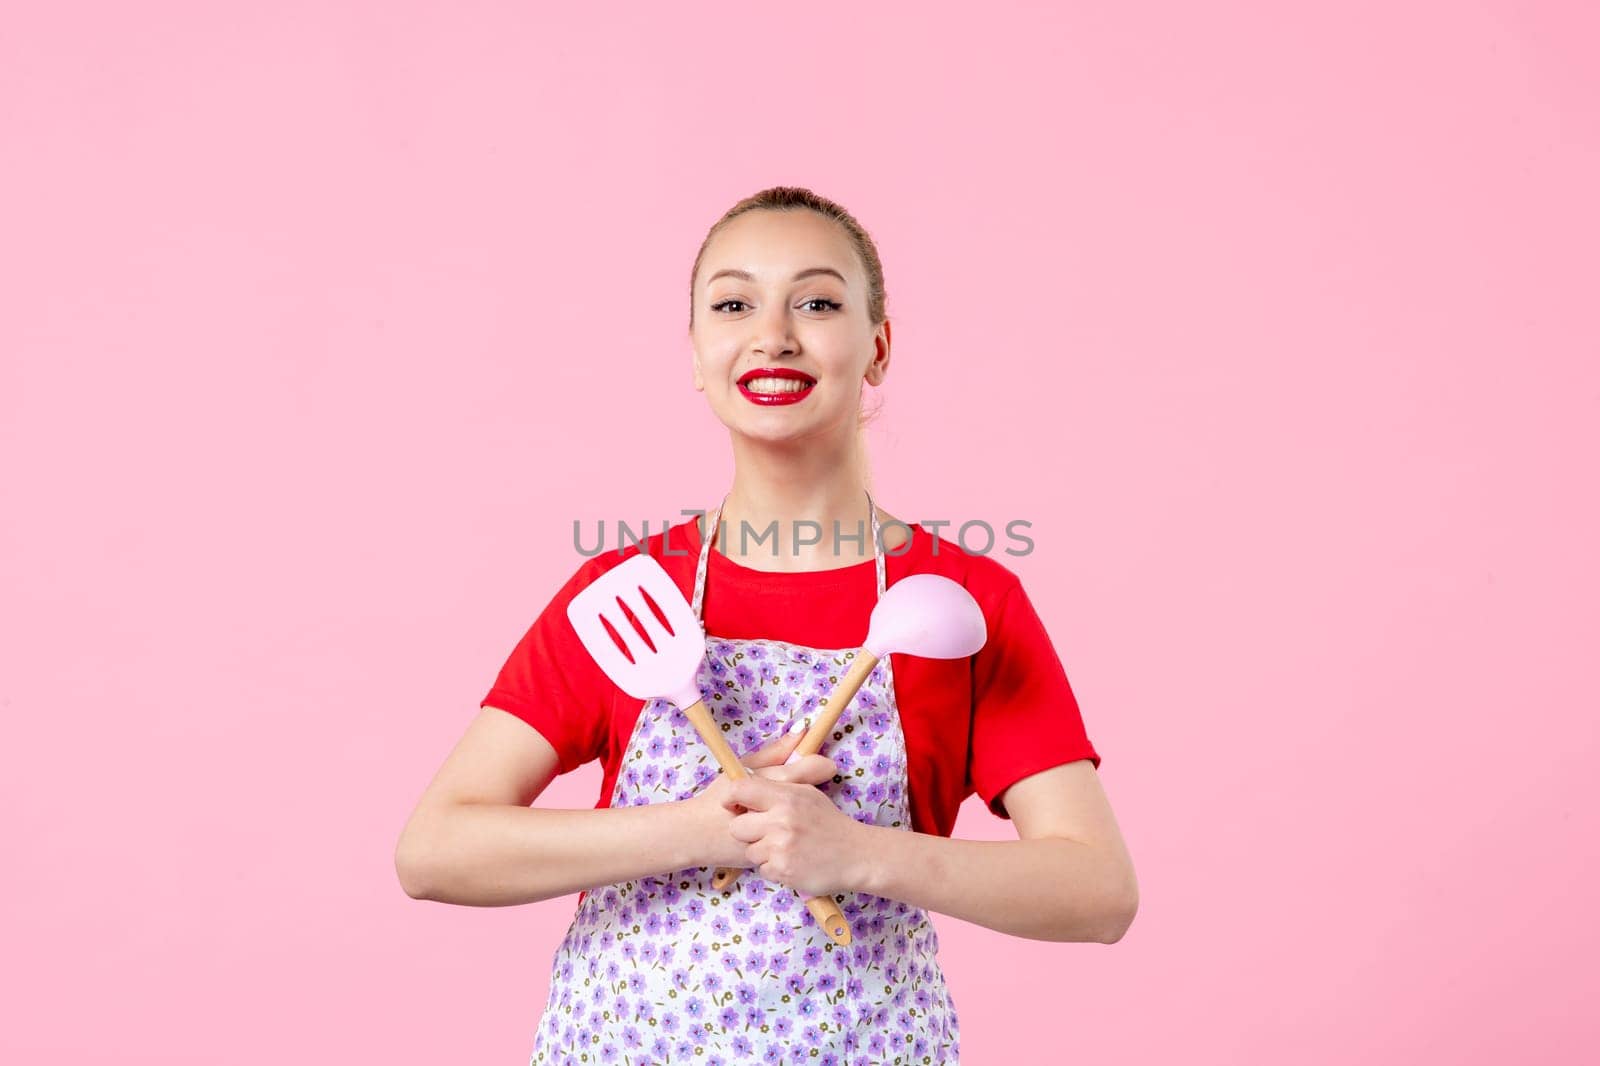 front view young pretty housewife in cape with spoons on pink background uniform job profession cooking worker wife duty occupation